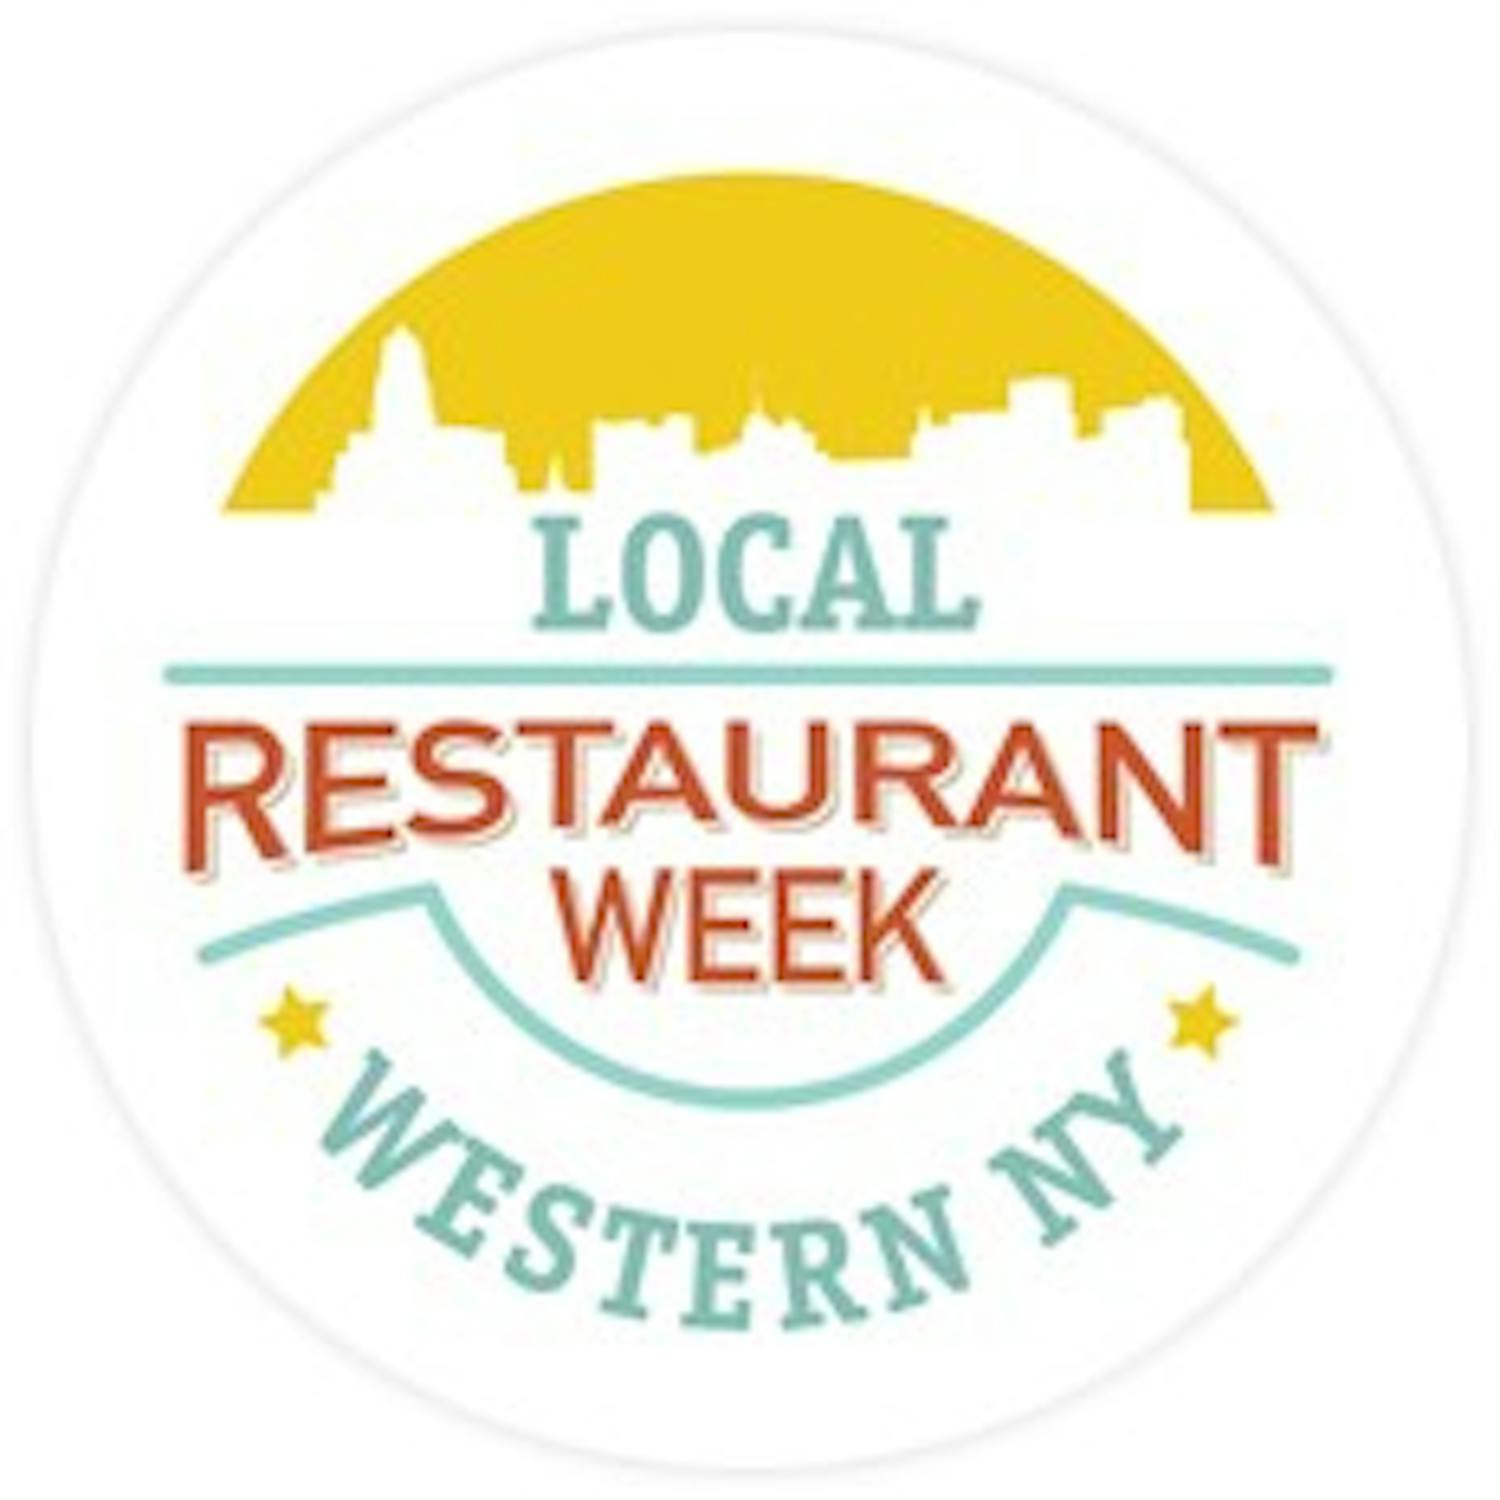 Local Restaurant Week takes place from April 11-17 is one of many events around Buffalo this month.&nbsp;